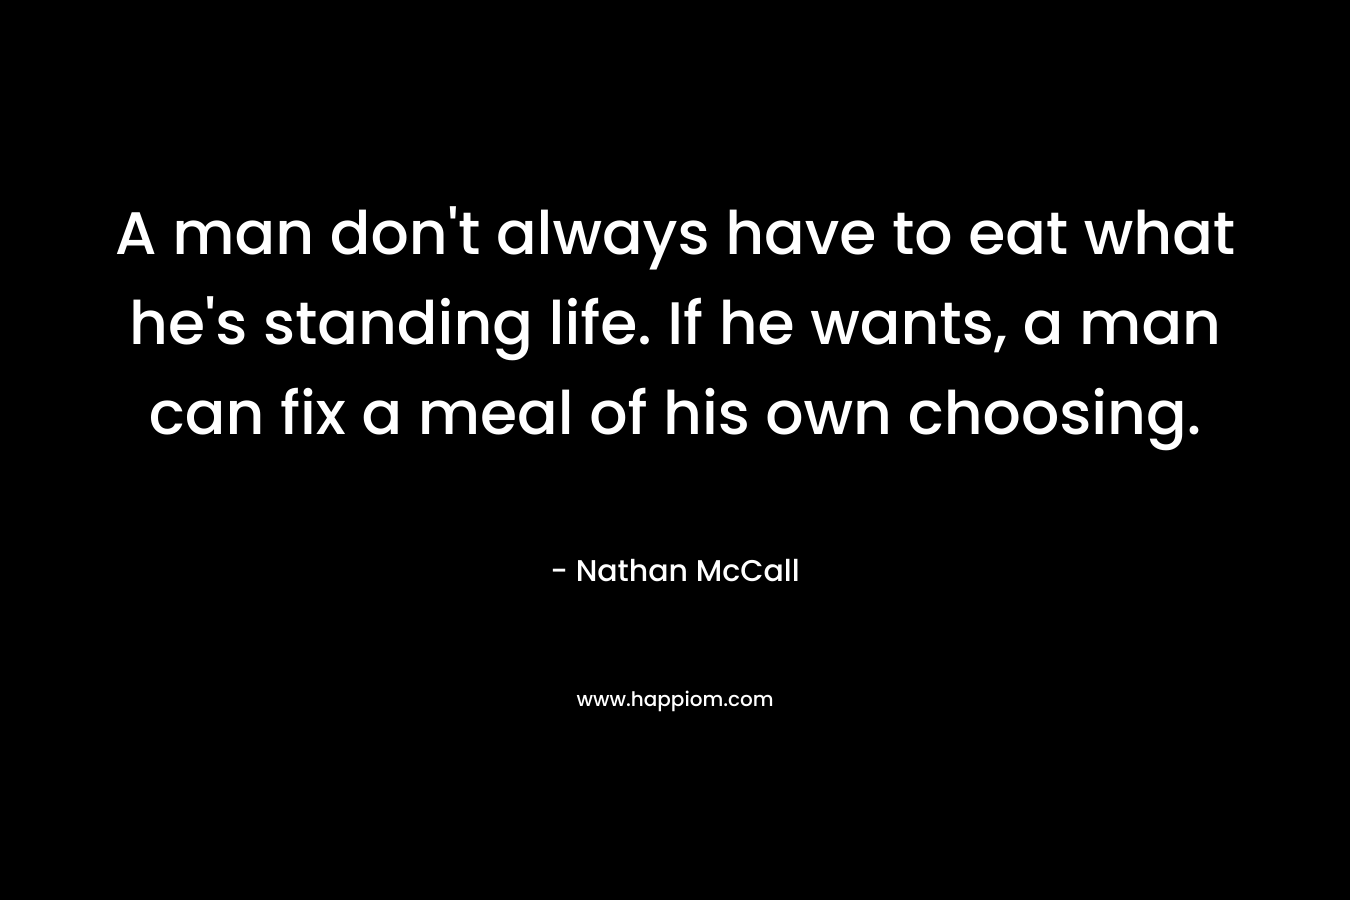 A man don’t always have to eat what he’s standing life. If he wants, a man can fix a meal of his own choosing. – Nathan McCall